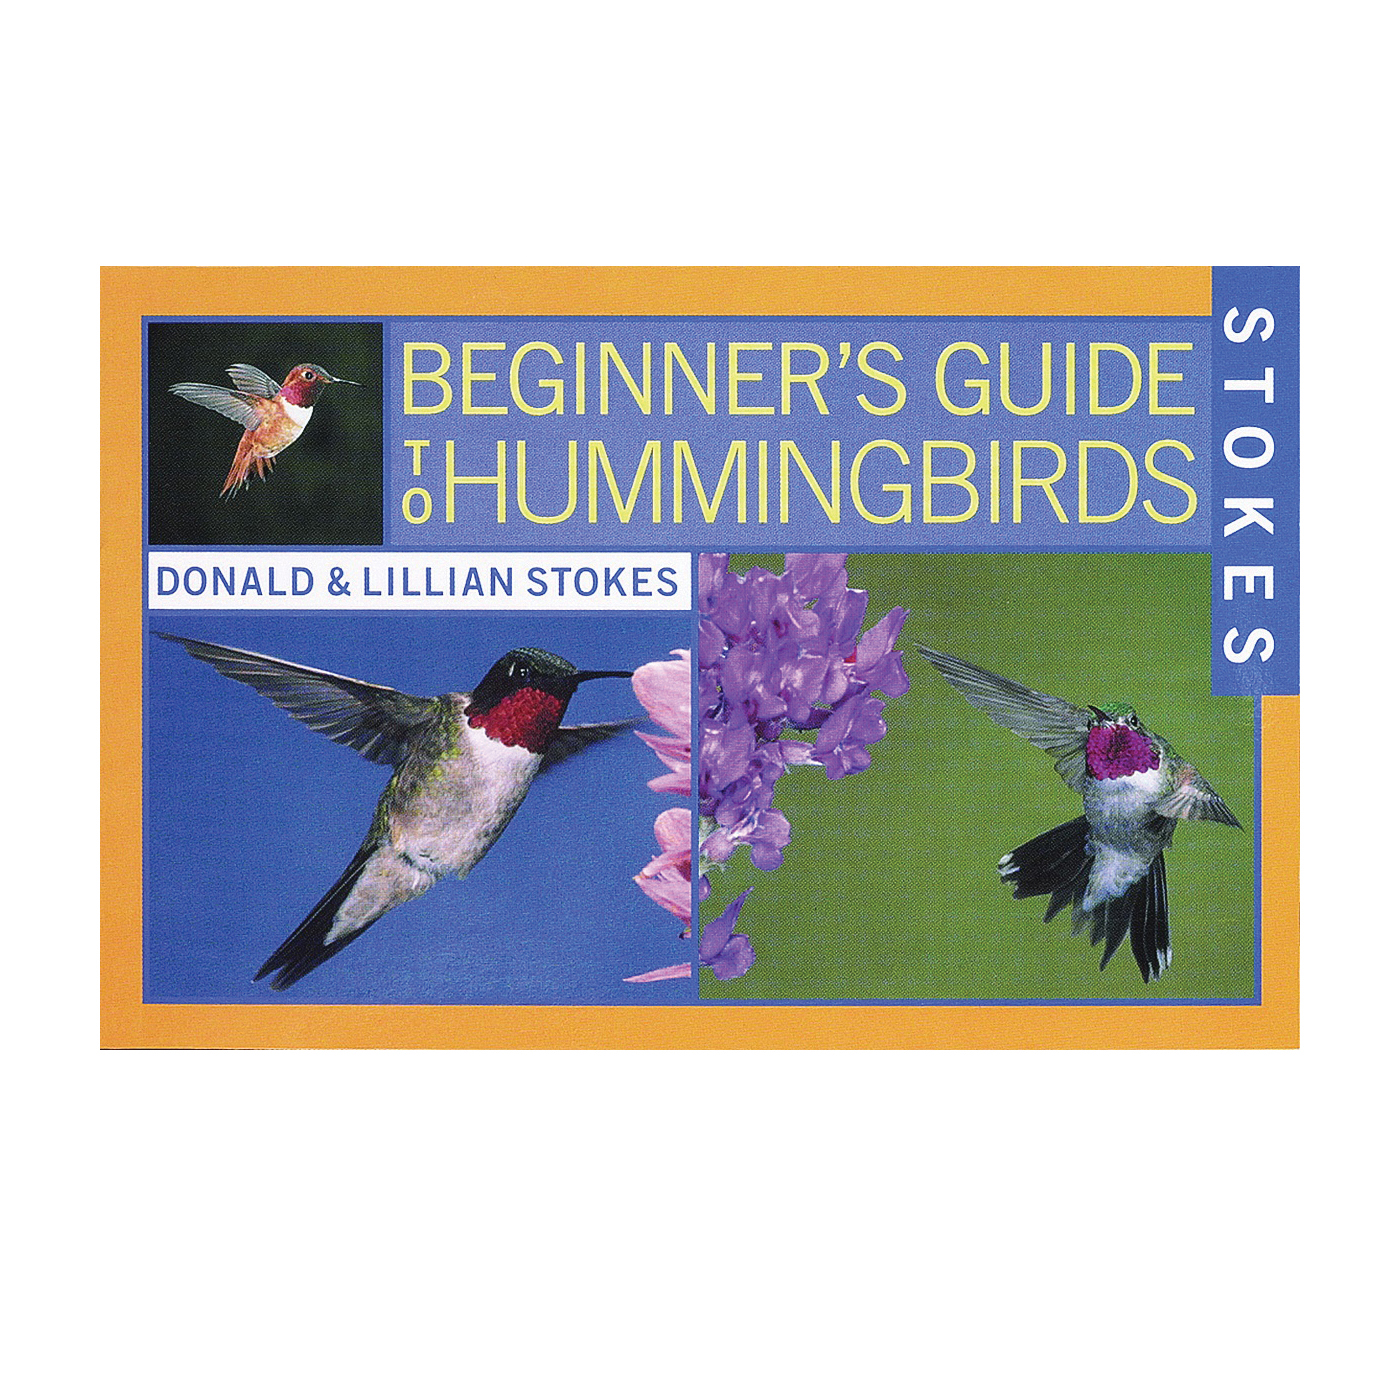 38061 Bird Book, Beginner’s Guide To Hummingbirds, Author: Donald, Lillian Stokes, 144-Page